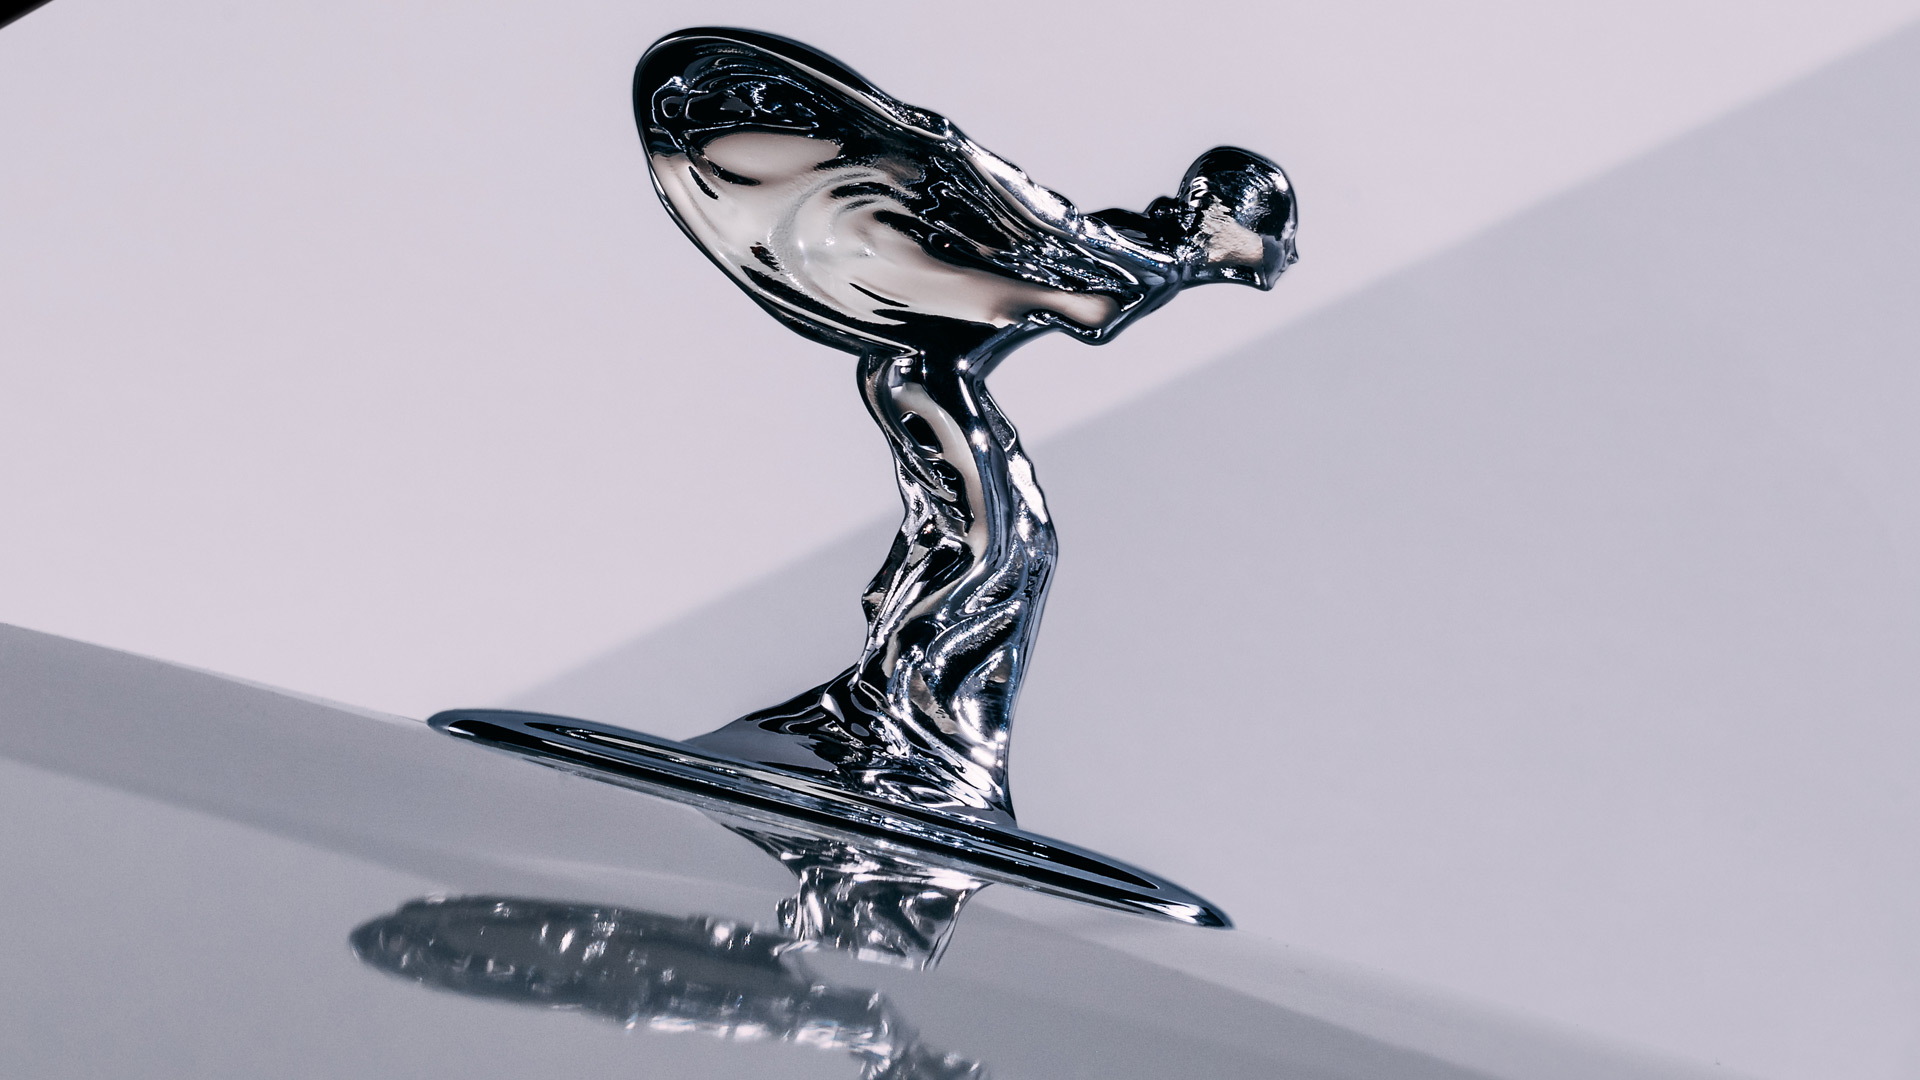 the-hood-ornament-officially-known-as-the-spirit-of-ecstasy-can-be-found-on-which-car